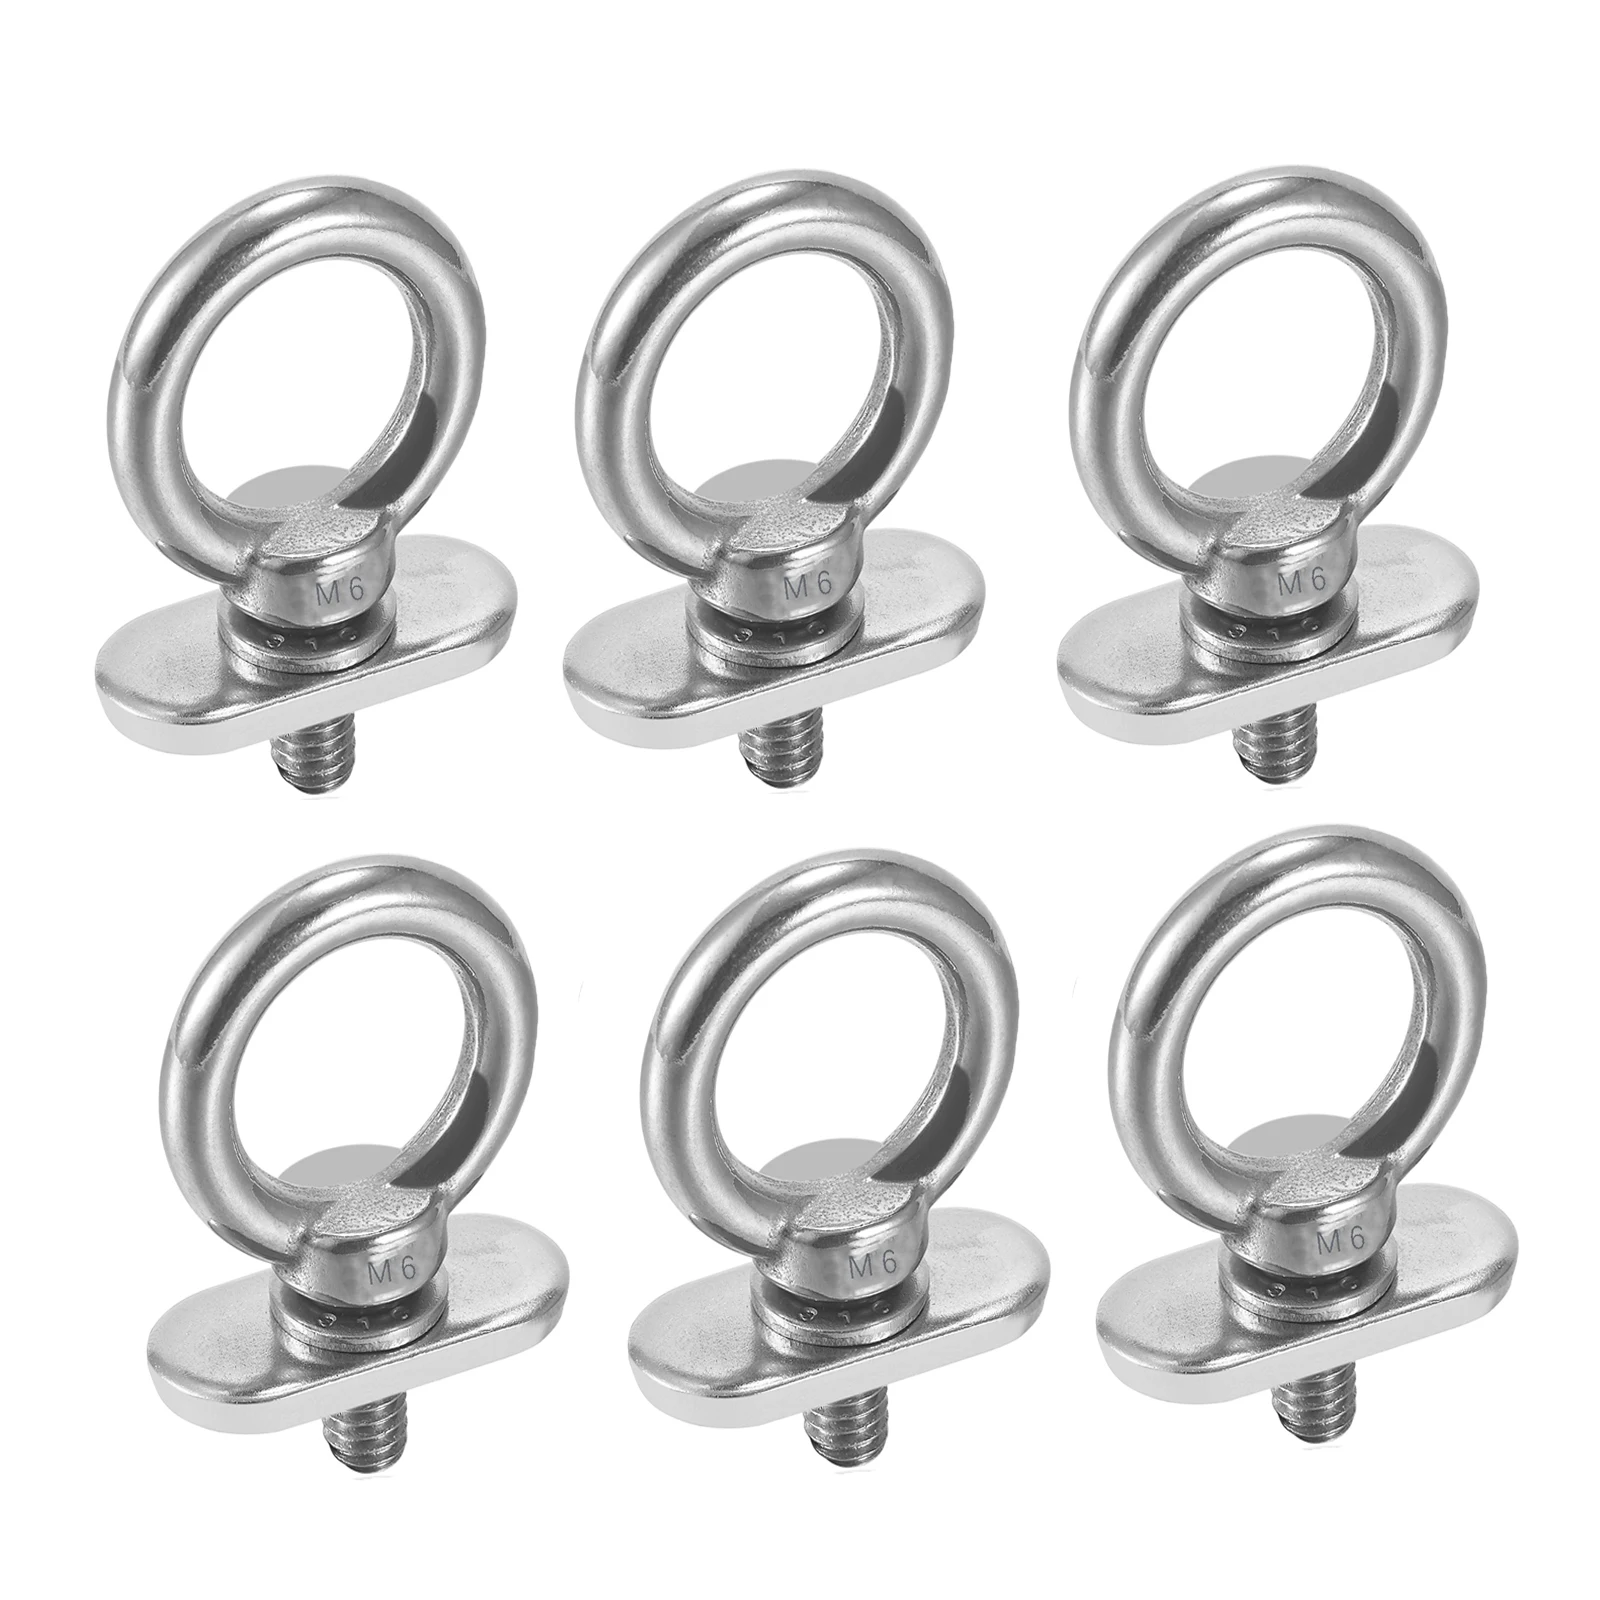 Track Mount Tie Down Eyelets, M6 Bolt, 316 Stainless Steel，Kayak Track Accessories (6 Packs) 2pc kayak ram mount track mounting base track gear attachment adapter track mount for canoe fishing rod accessories